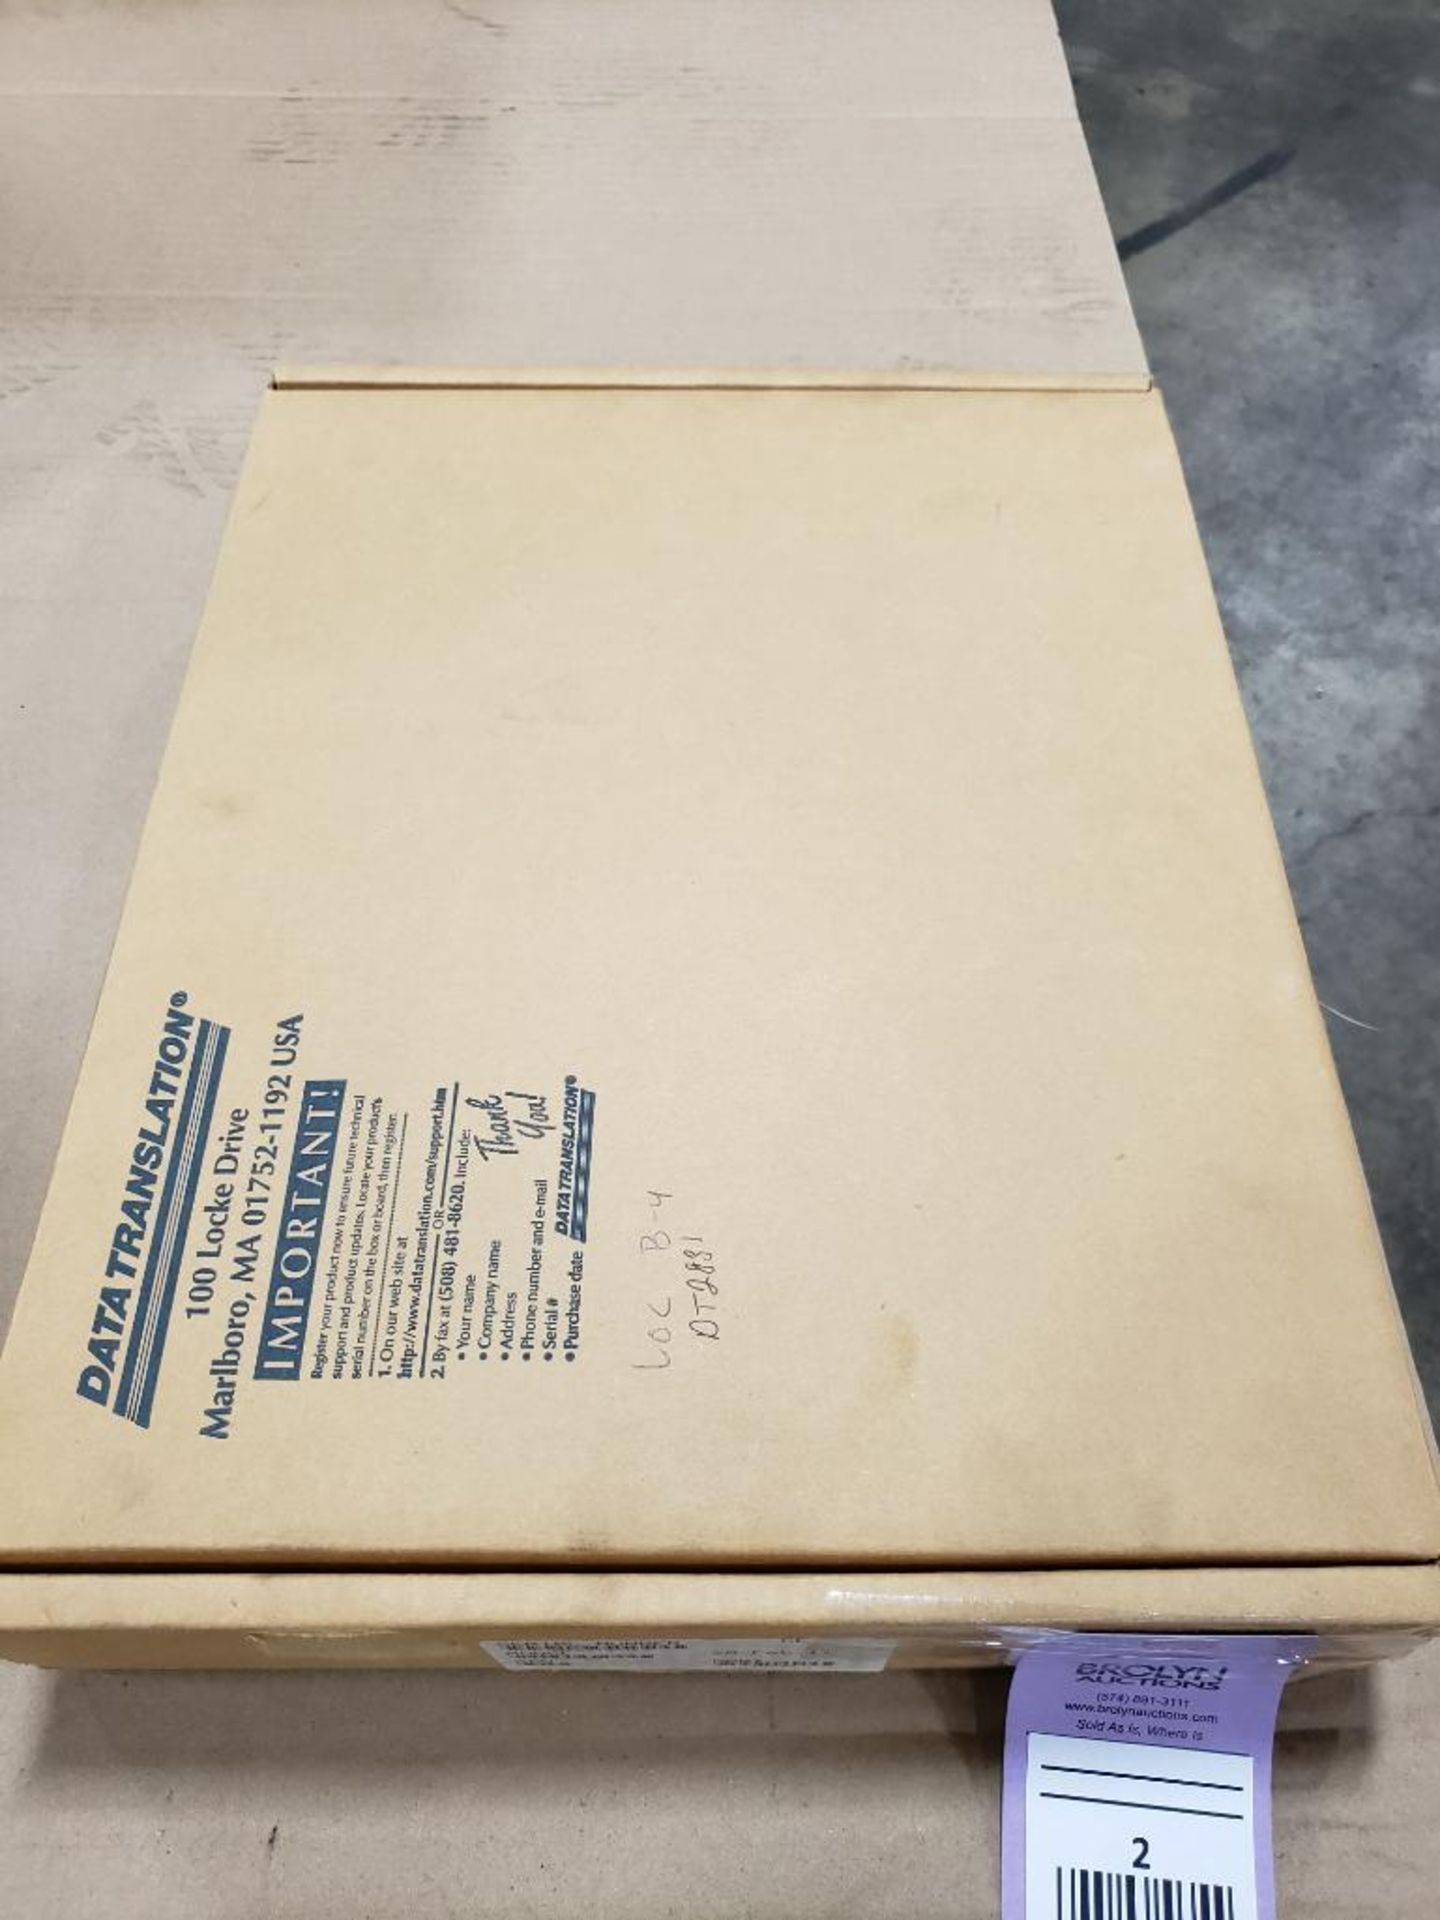 Data Translation control board. DT2831 series. Part number 10592. New in box w/ software & manuals.